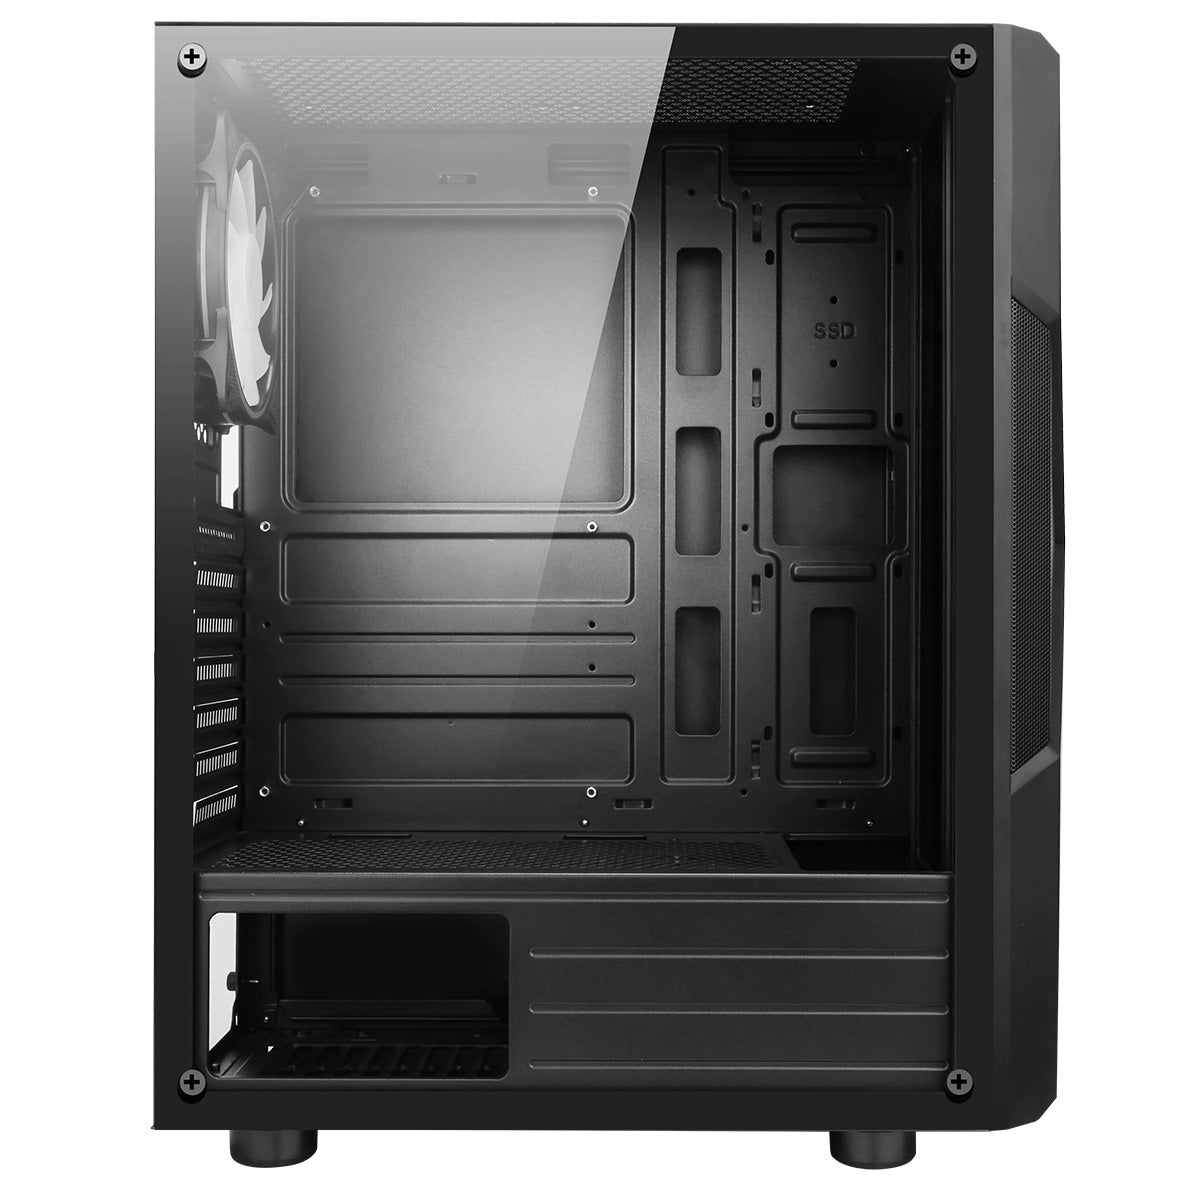 CiT Pyro Gaming Windowed Mid Tower ARGB LED Gaming PC Case with Tempered Glass Window